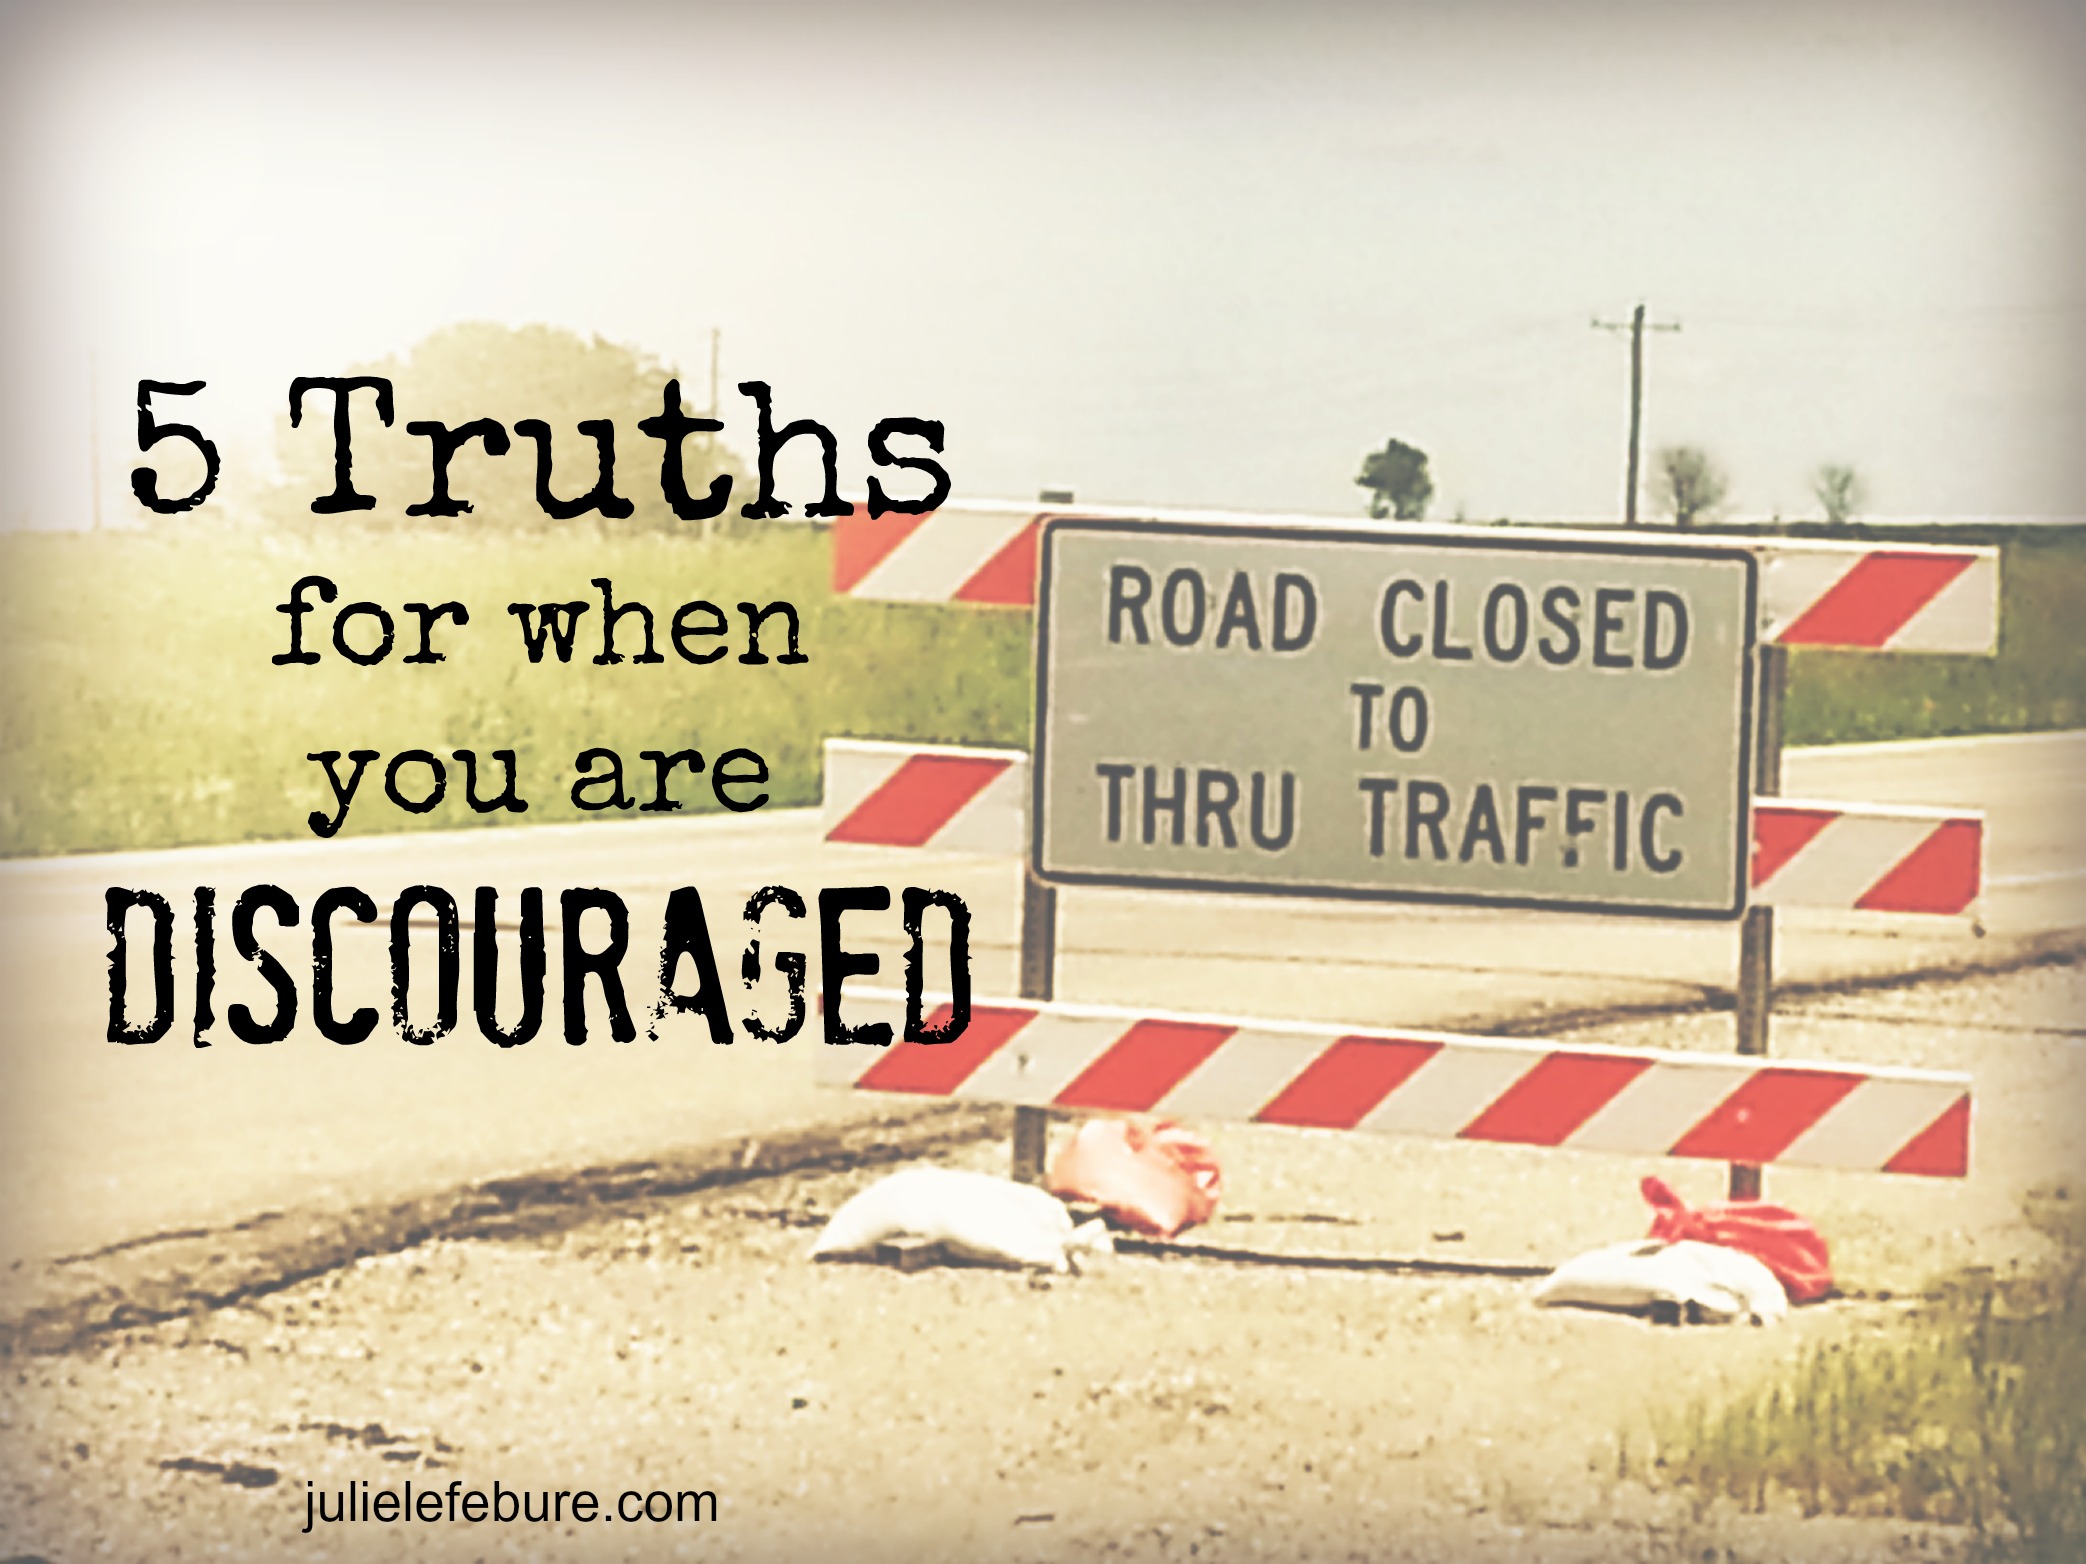 5 Truths For When You Are Discouraged